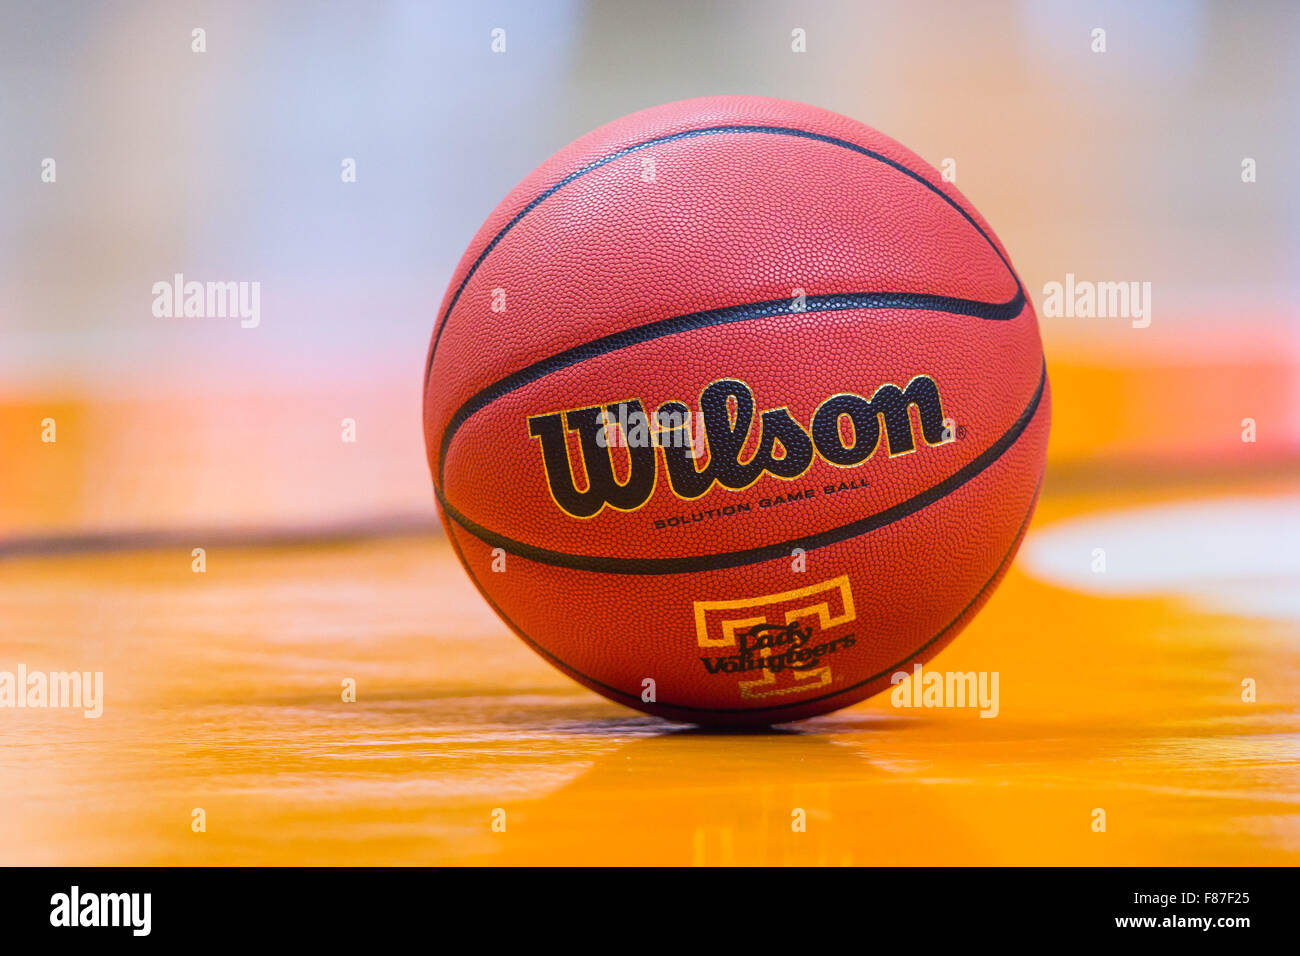 December 6, 2015: The Wilson Lady Vols ball during the NCAA basketball game between the University of Tennessee Lady Volunteers and the Virginia Tech Hokies at Thompson Boling Arena in Knoxville TN Tim Gangloff/CSM Stock Photo